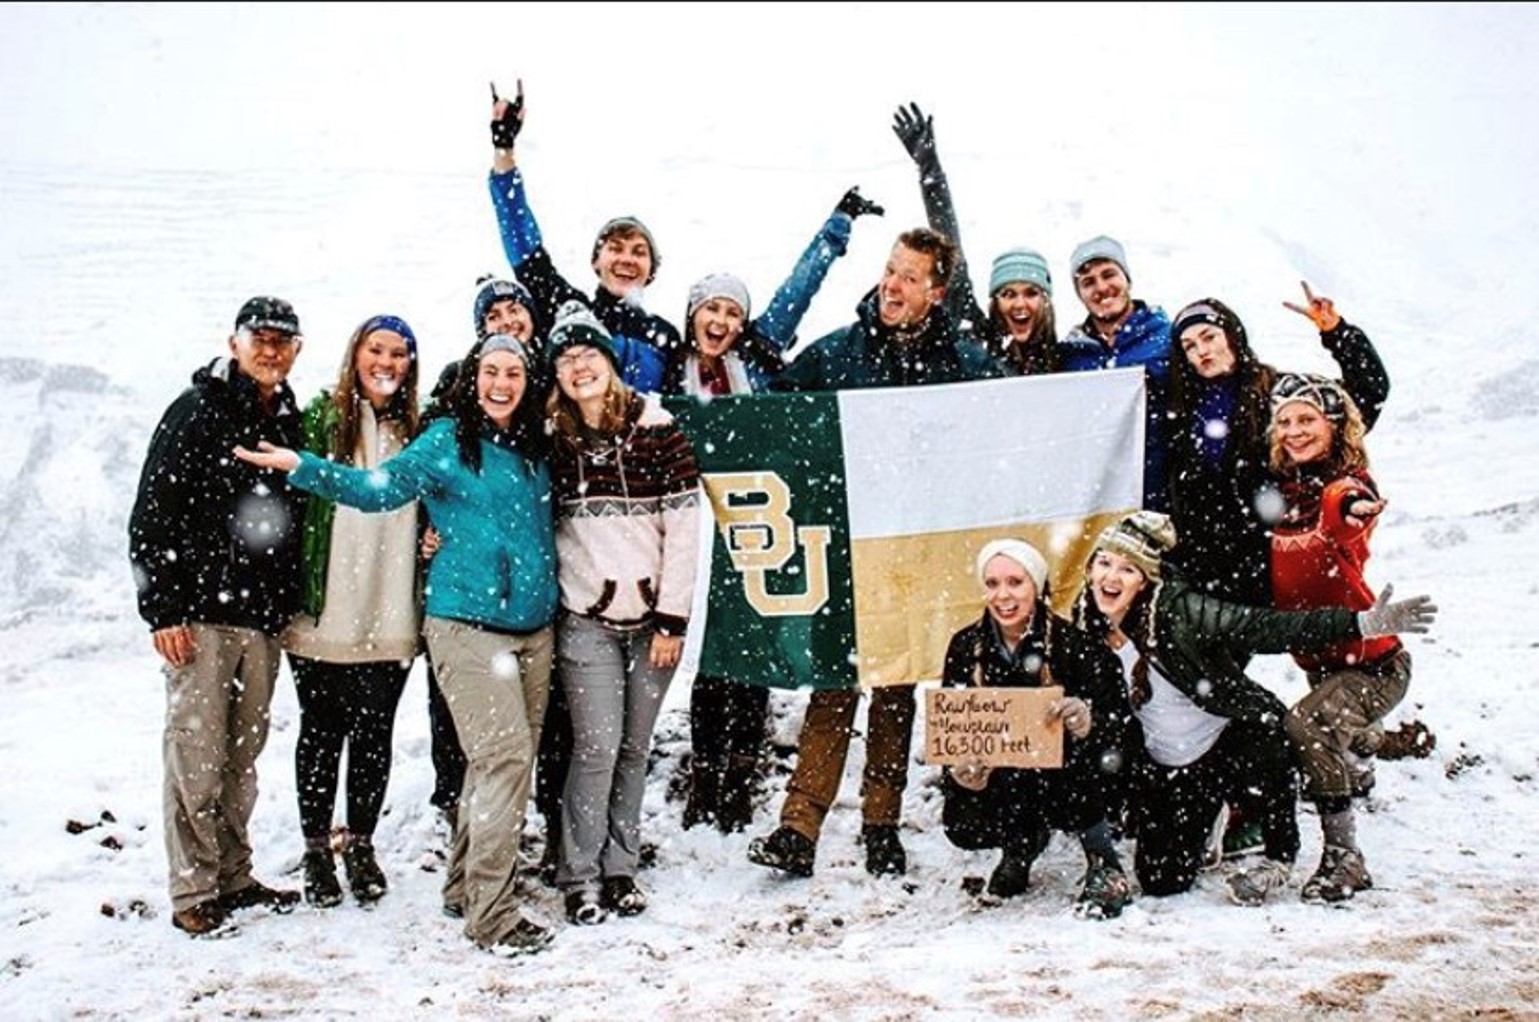 A group of people stand in the snow holding a BU flag.